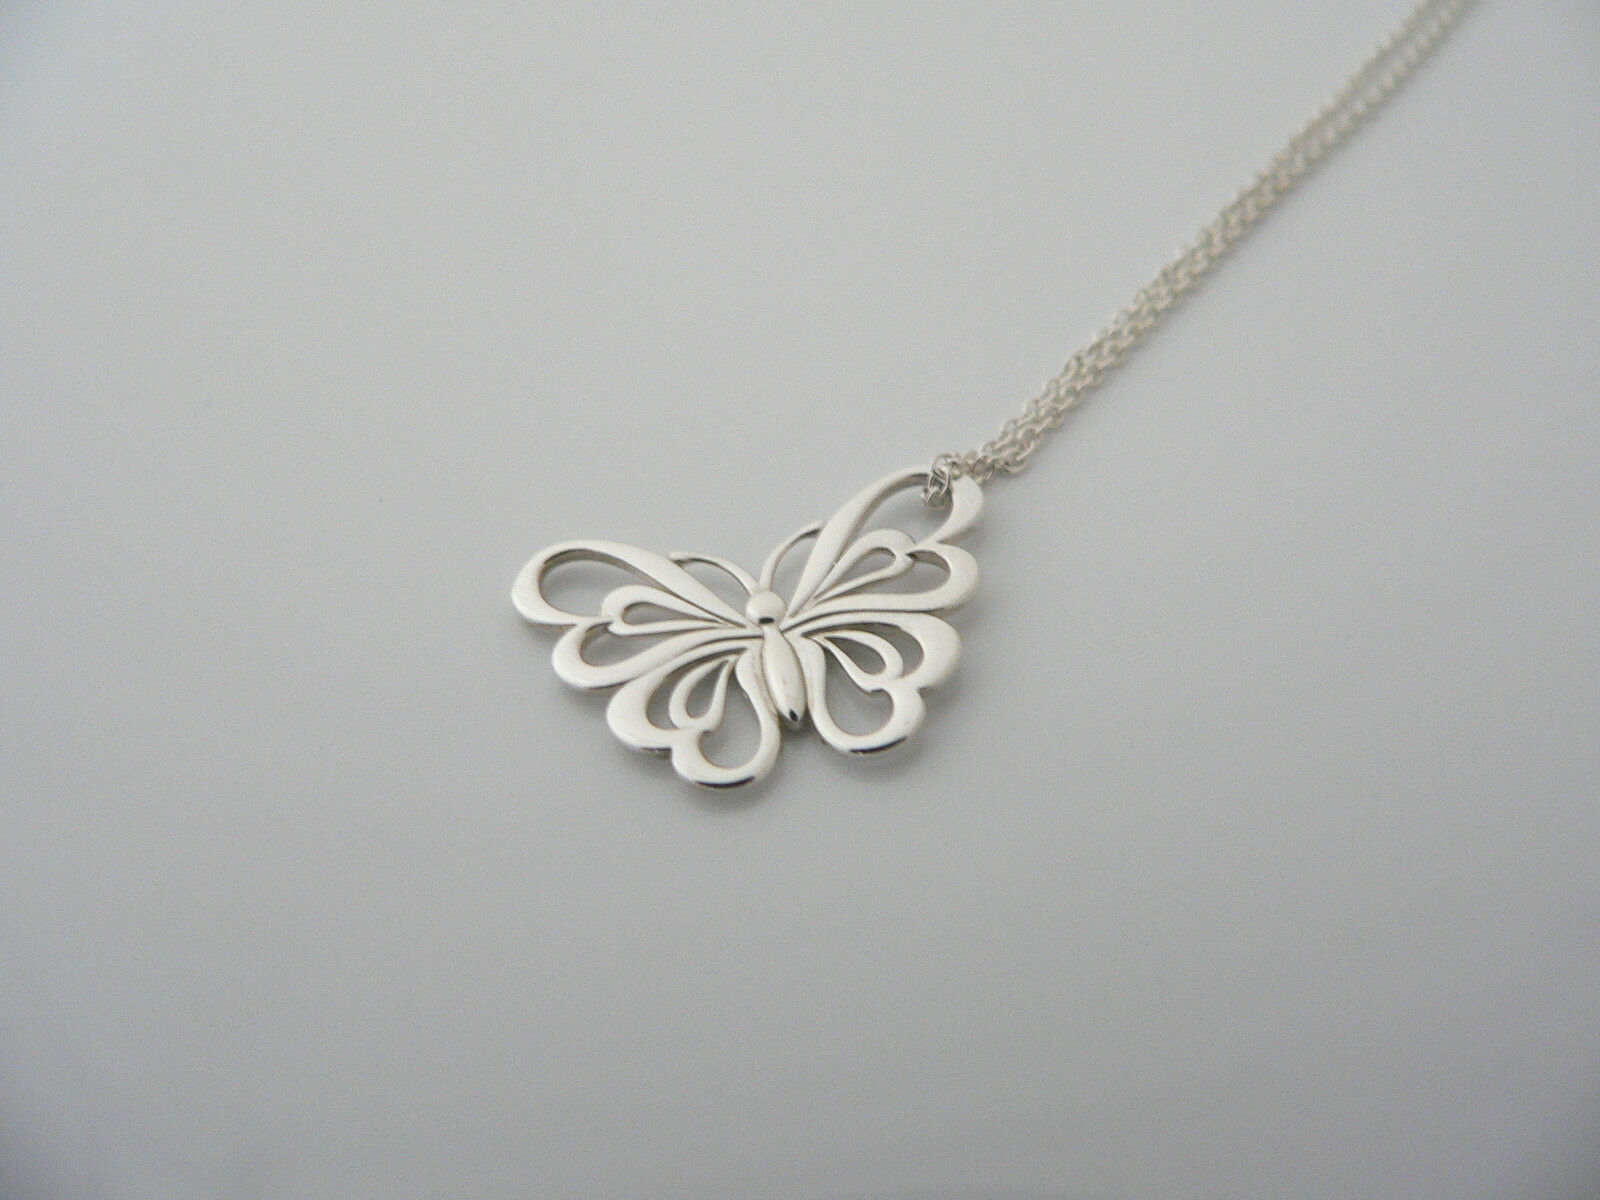 Tiffany & Co Silver Stencil Butterfly Necklace Pendant Charm Nature Gift Love